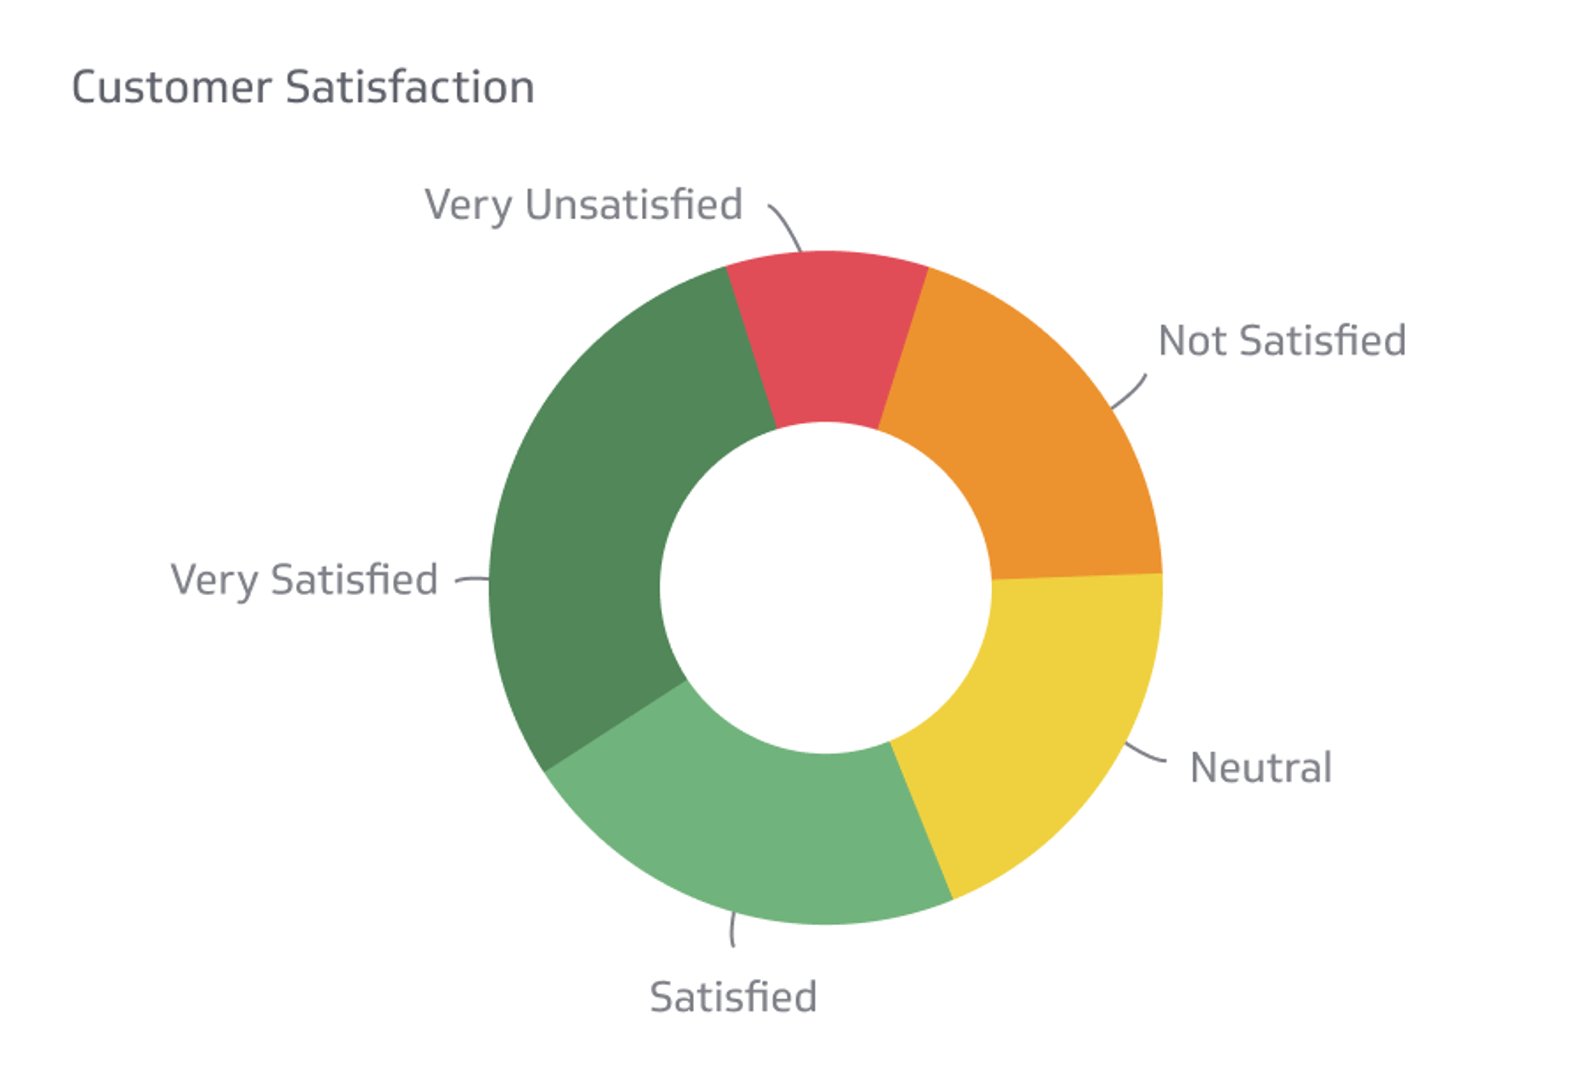 Related KPI Examples - Customer Satisfaction with Service Levels Metric